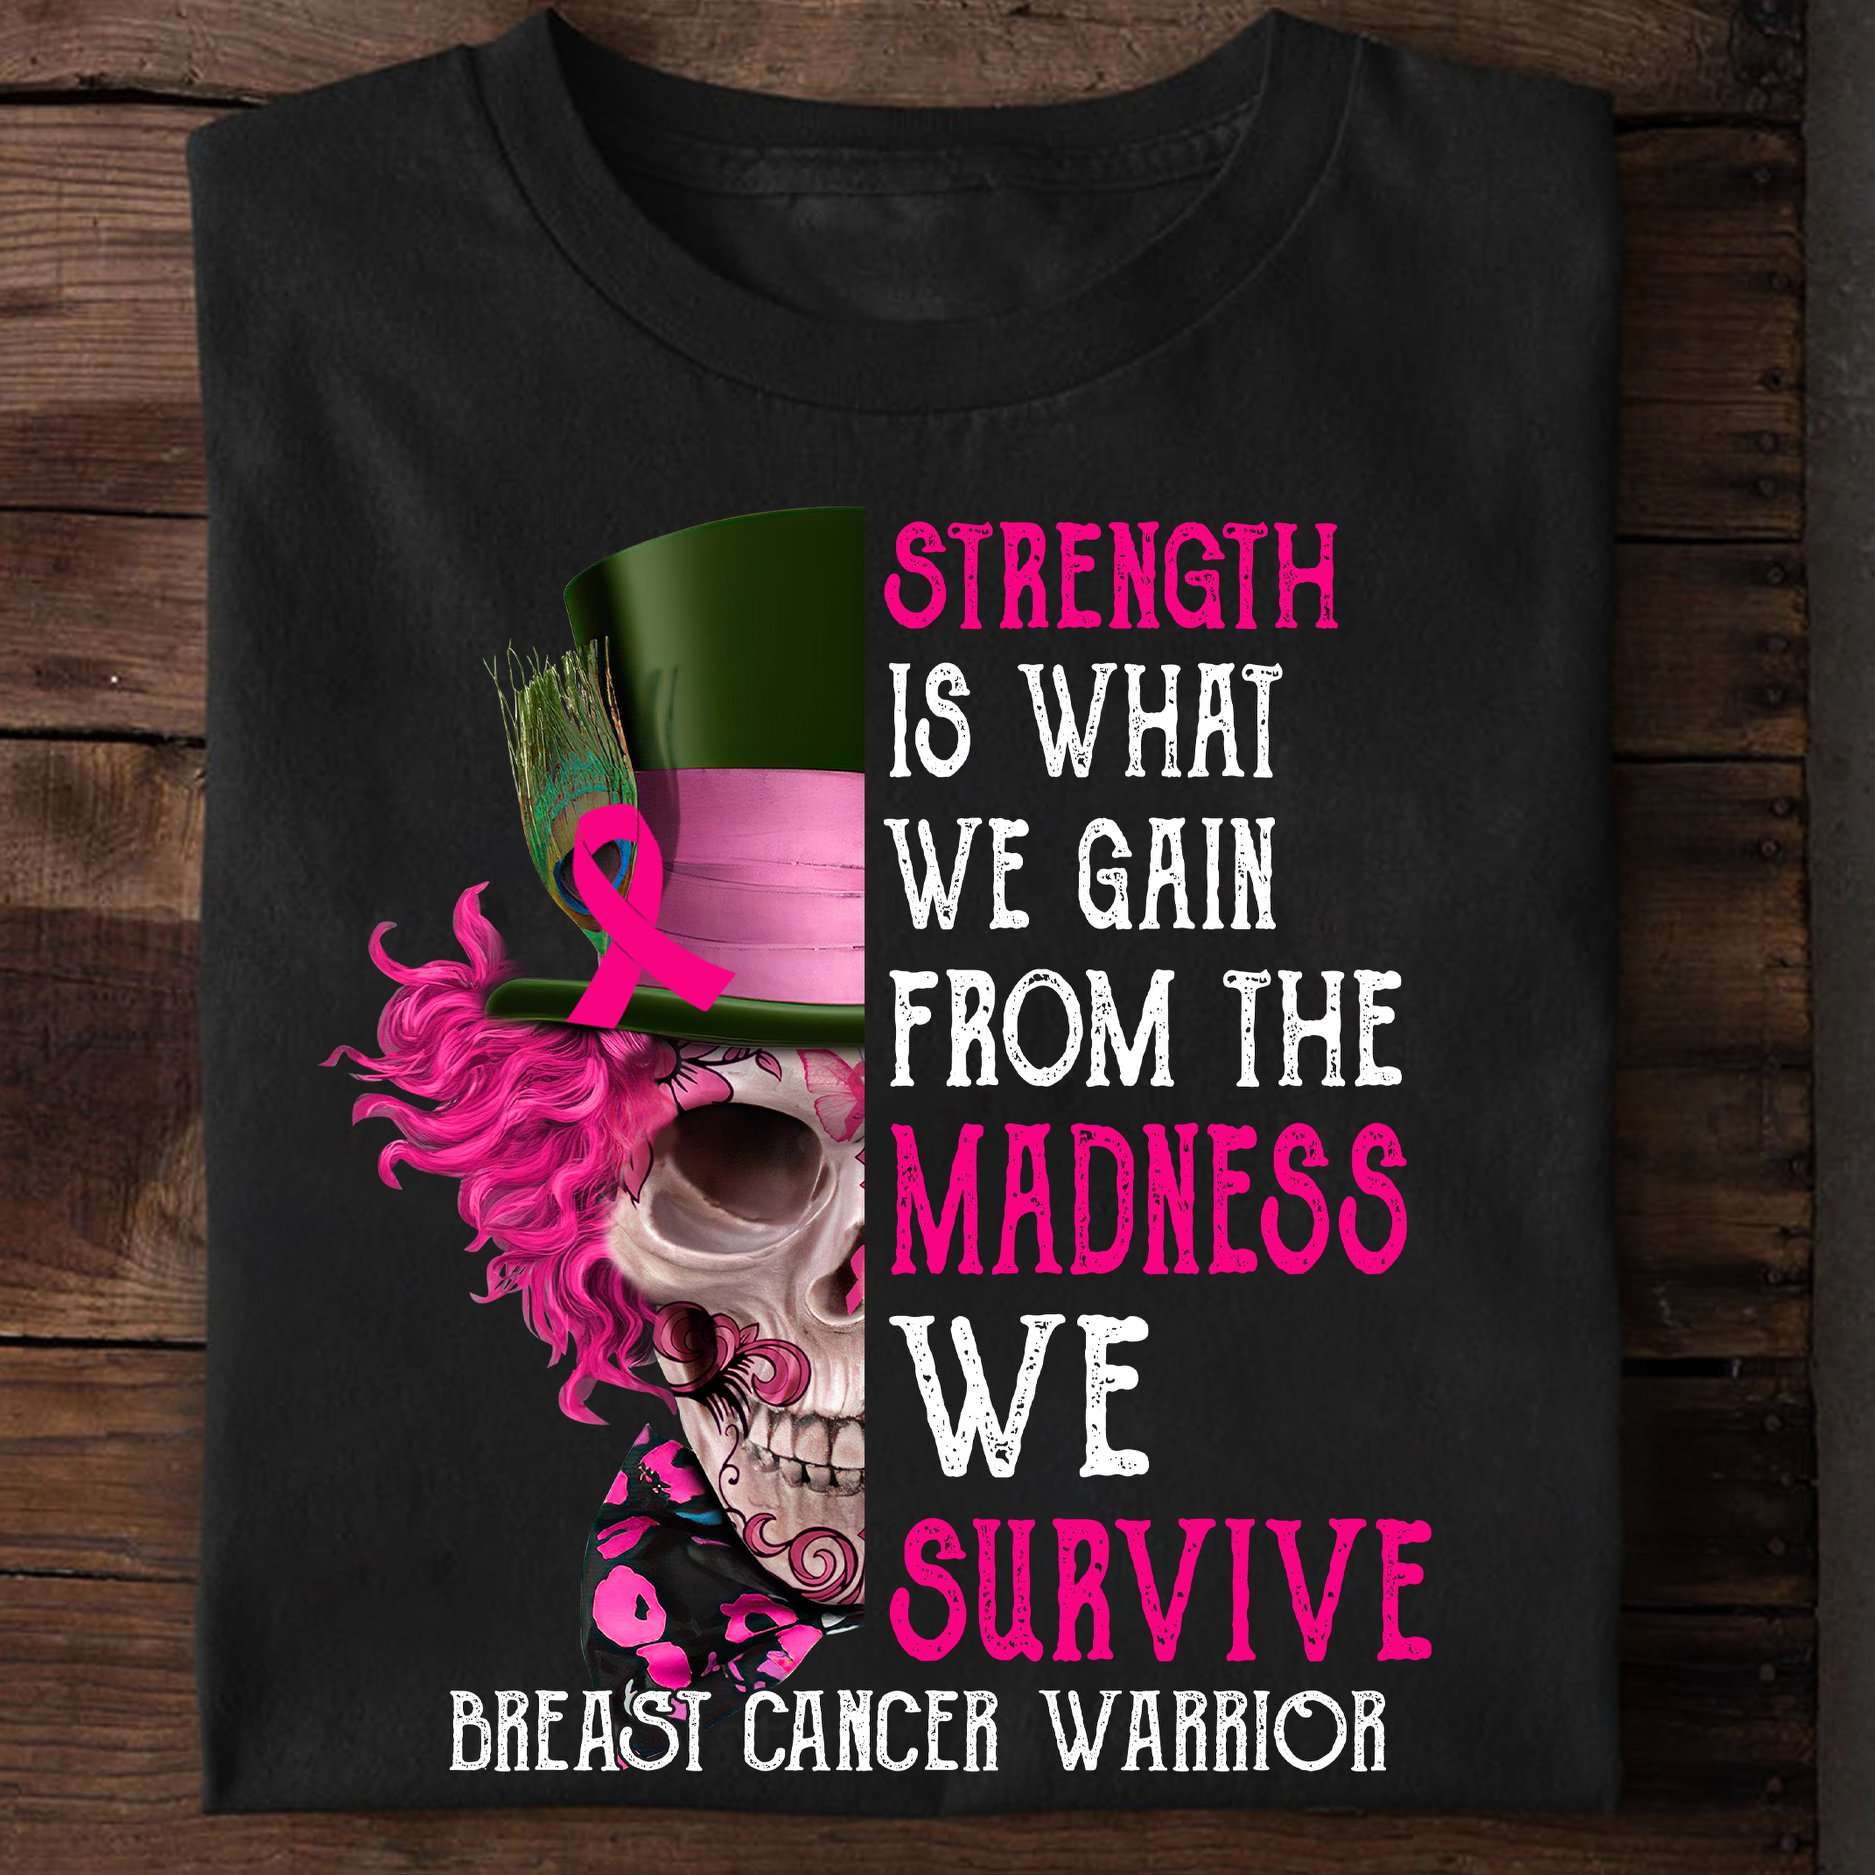 Strength is what we gain from the madness we survive - Breast cancer warrior, skull cancer ribbon